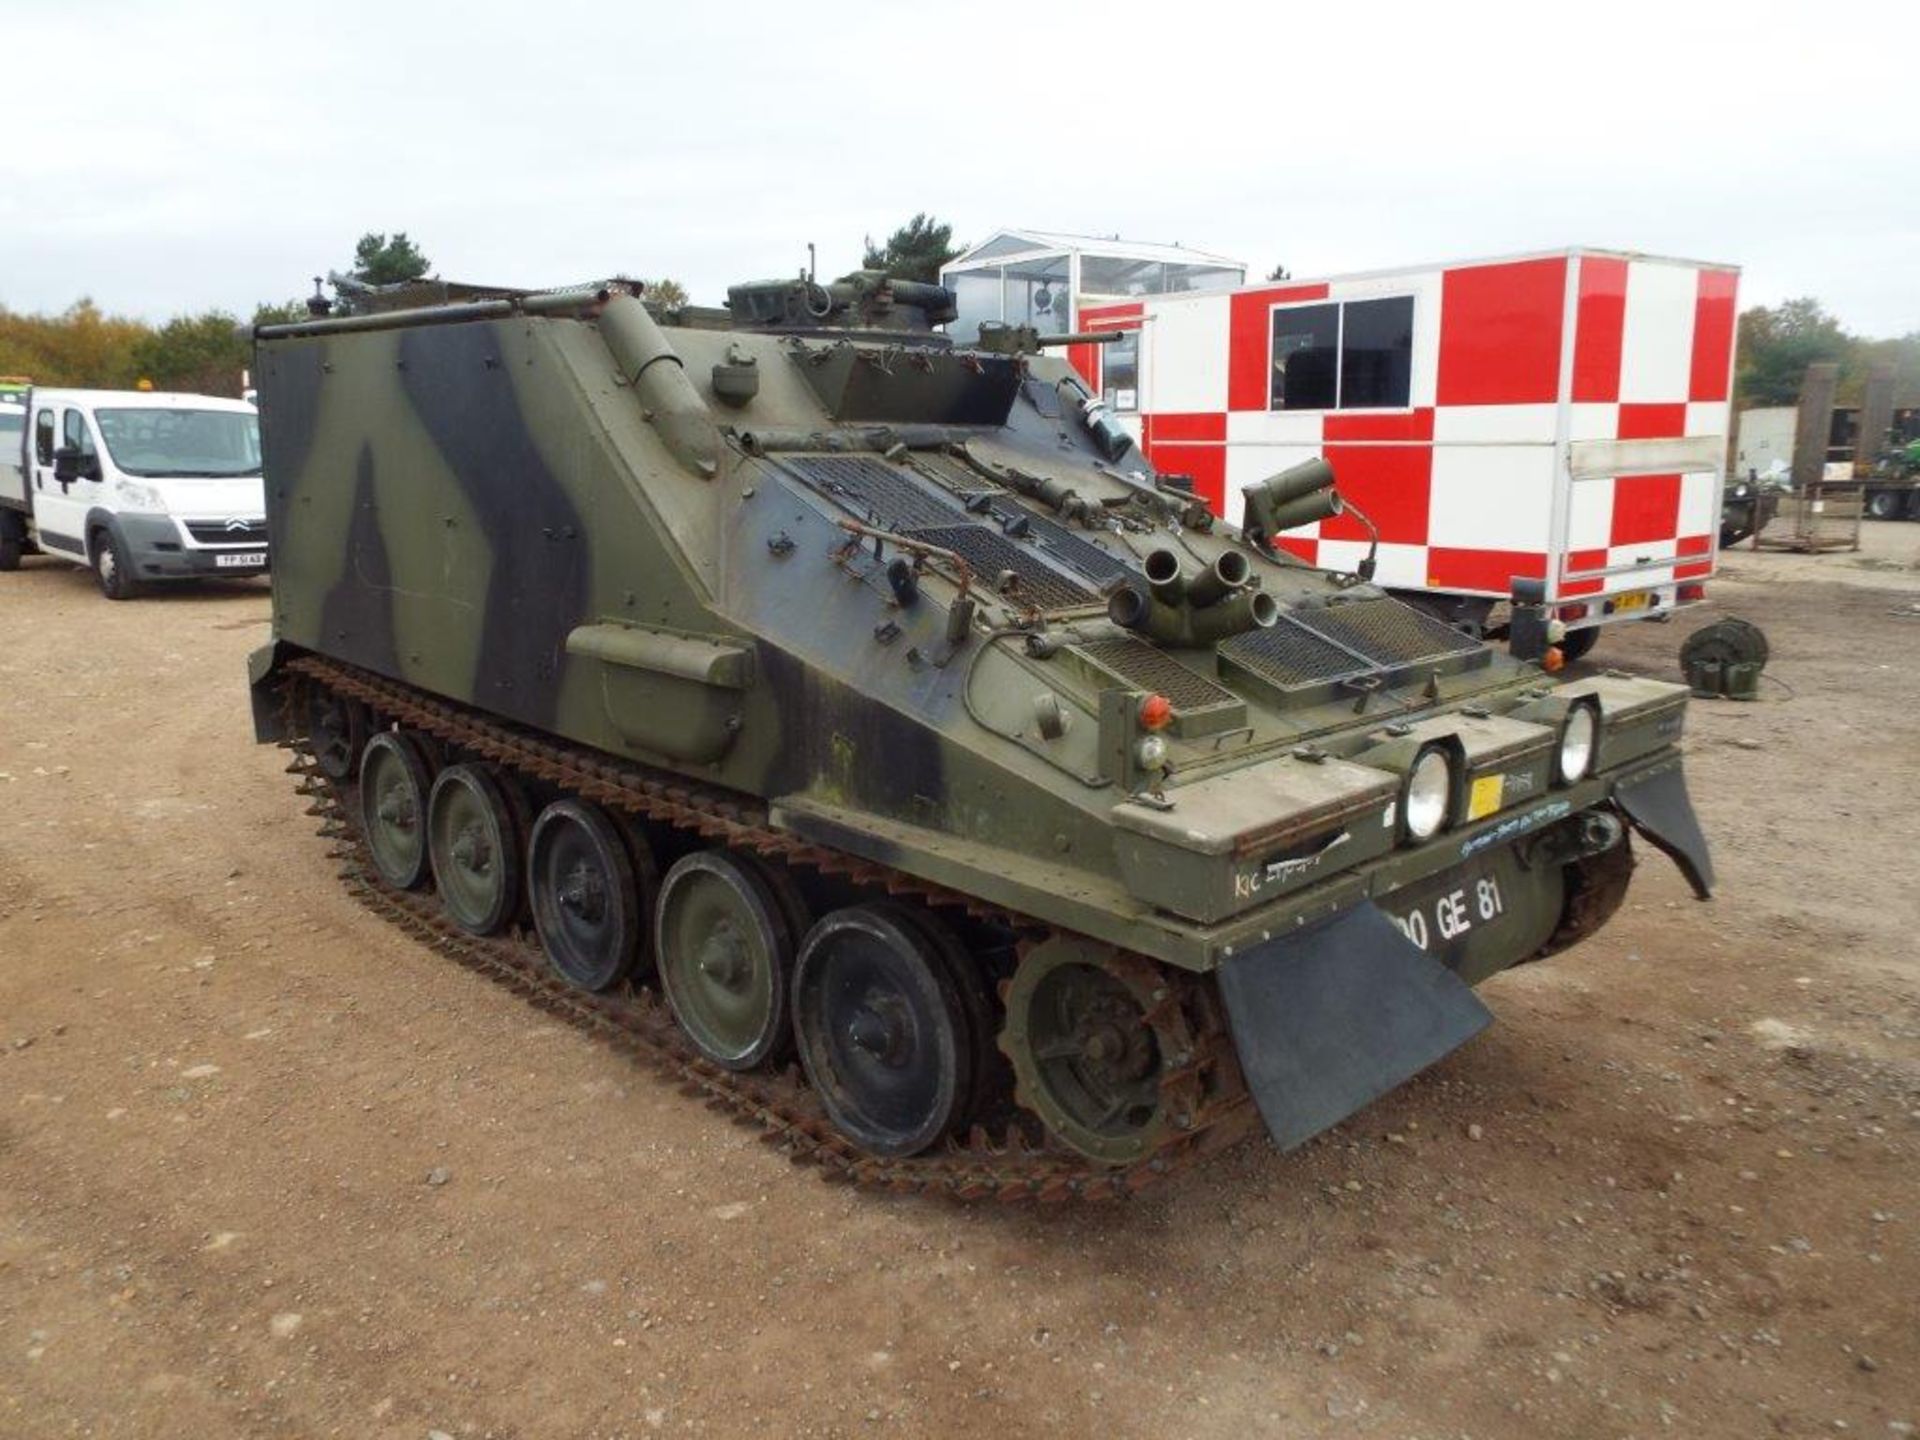 CVRT (Combat Vehicle Reconnaissance Tracked) FV105 Sultan Armoured Personnel Carrier